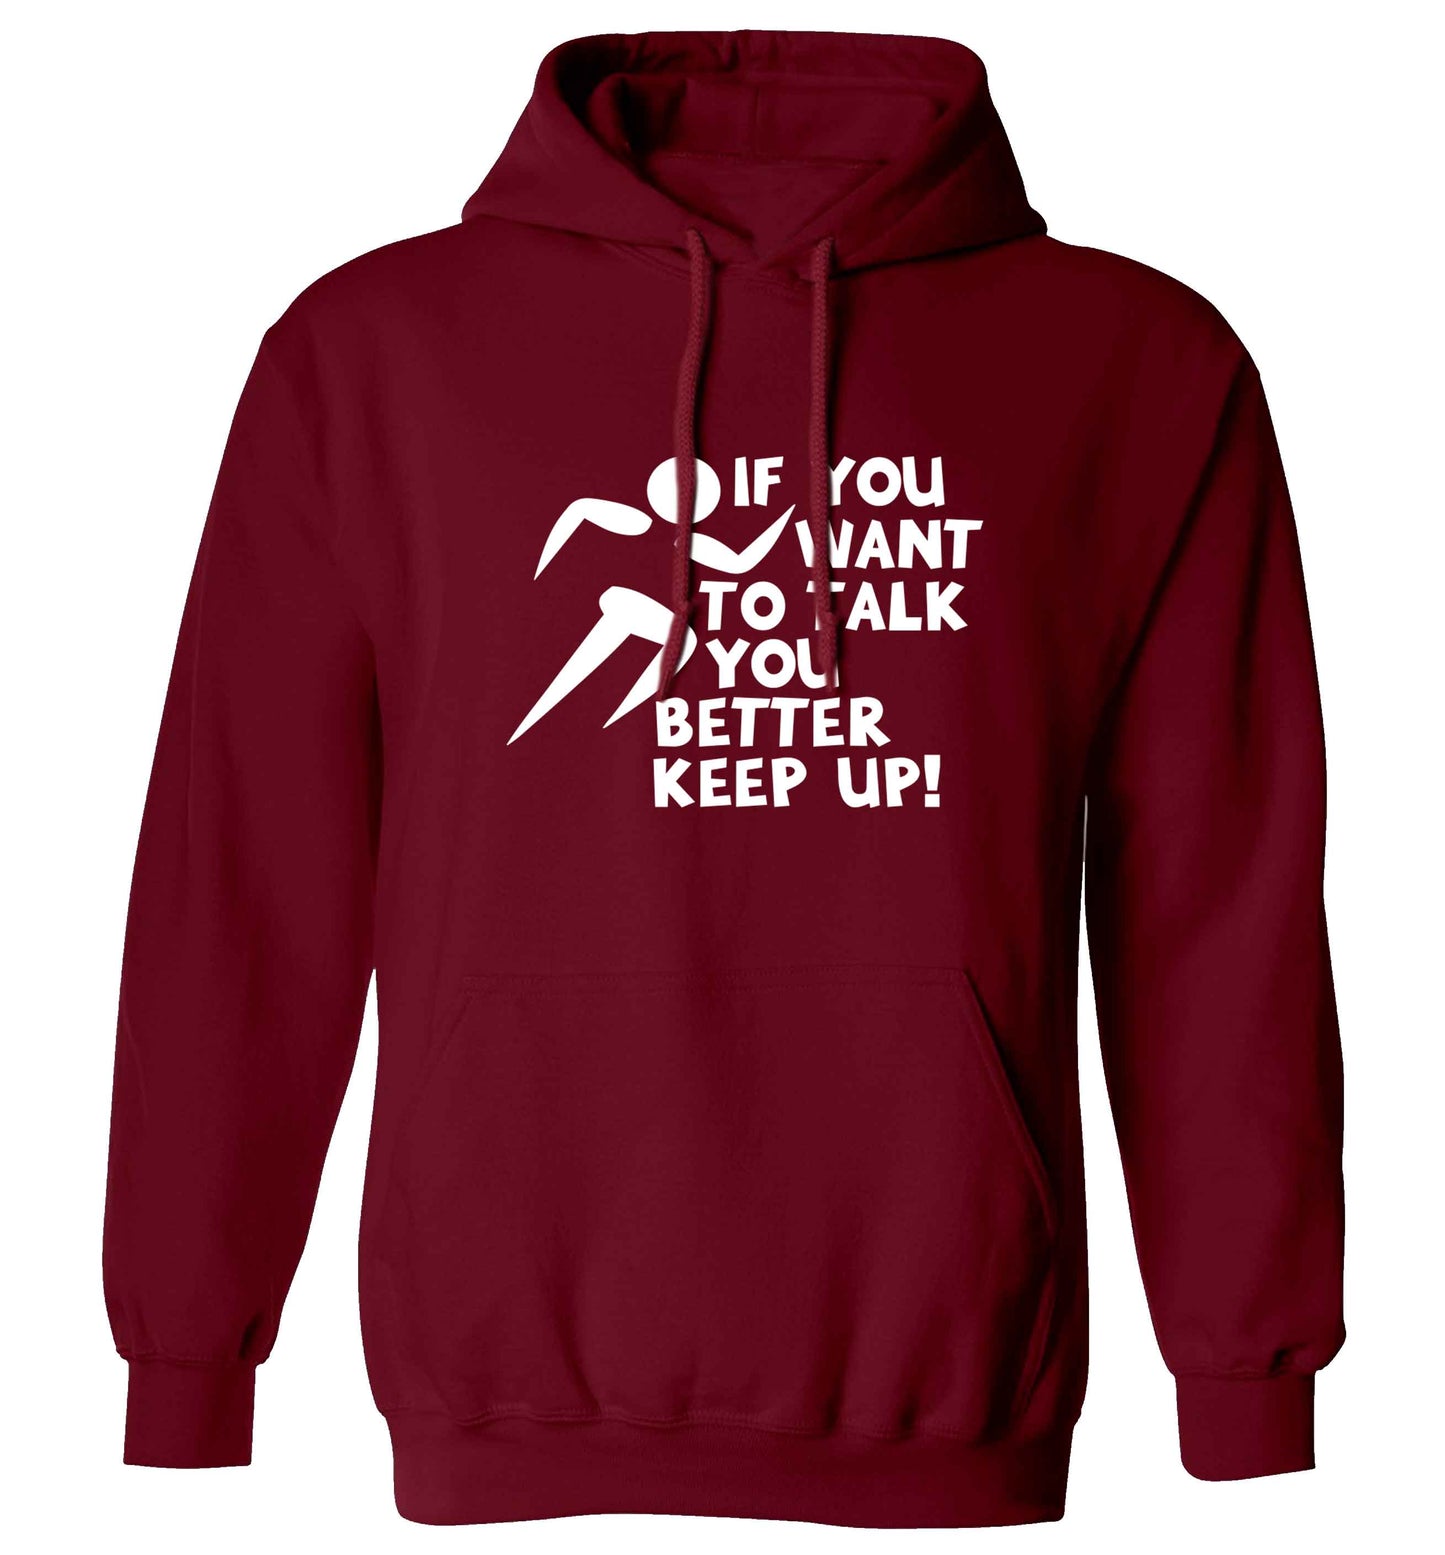 If you want to talk you better keep up! adults unisex maroon hoodie 2XL